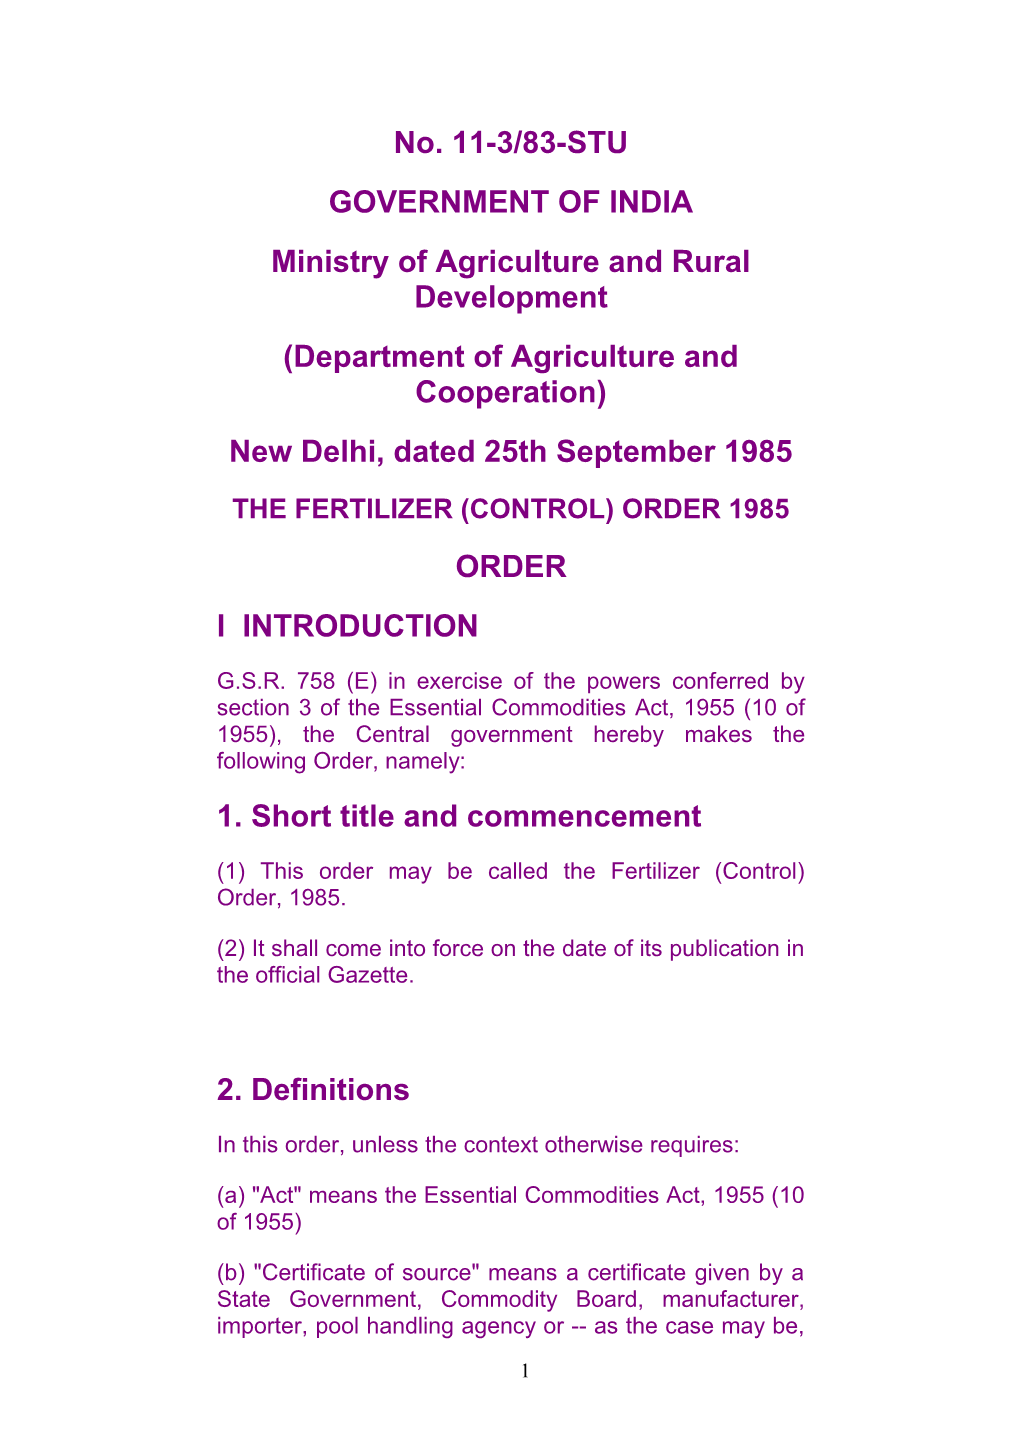 The Essential Commodities Act, 1955